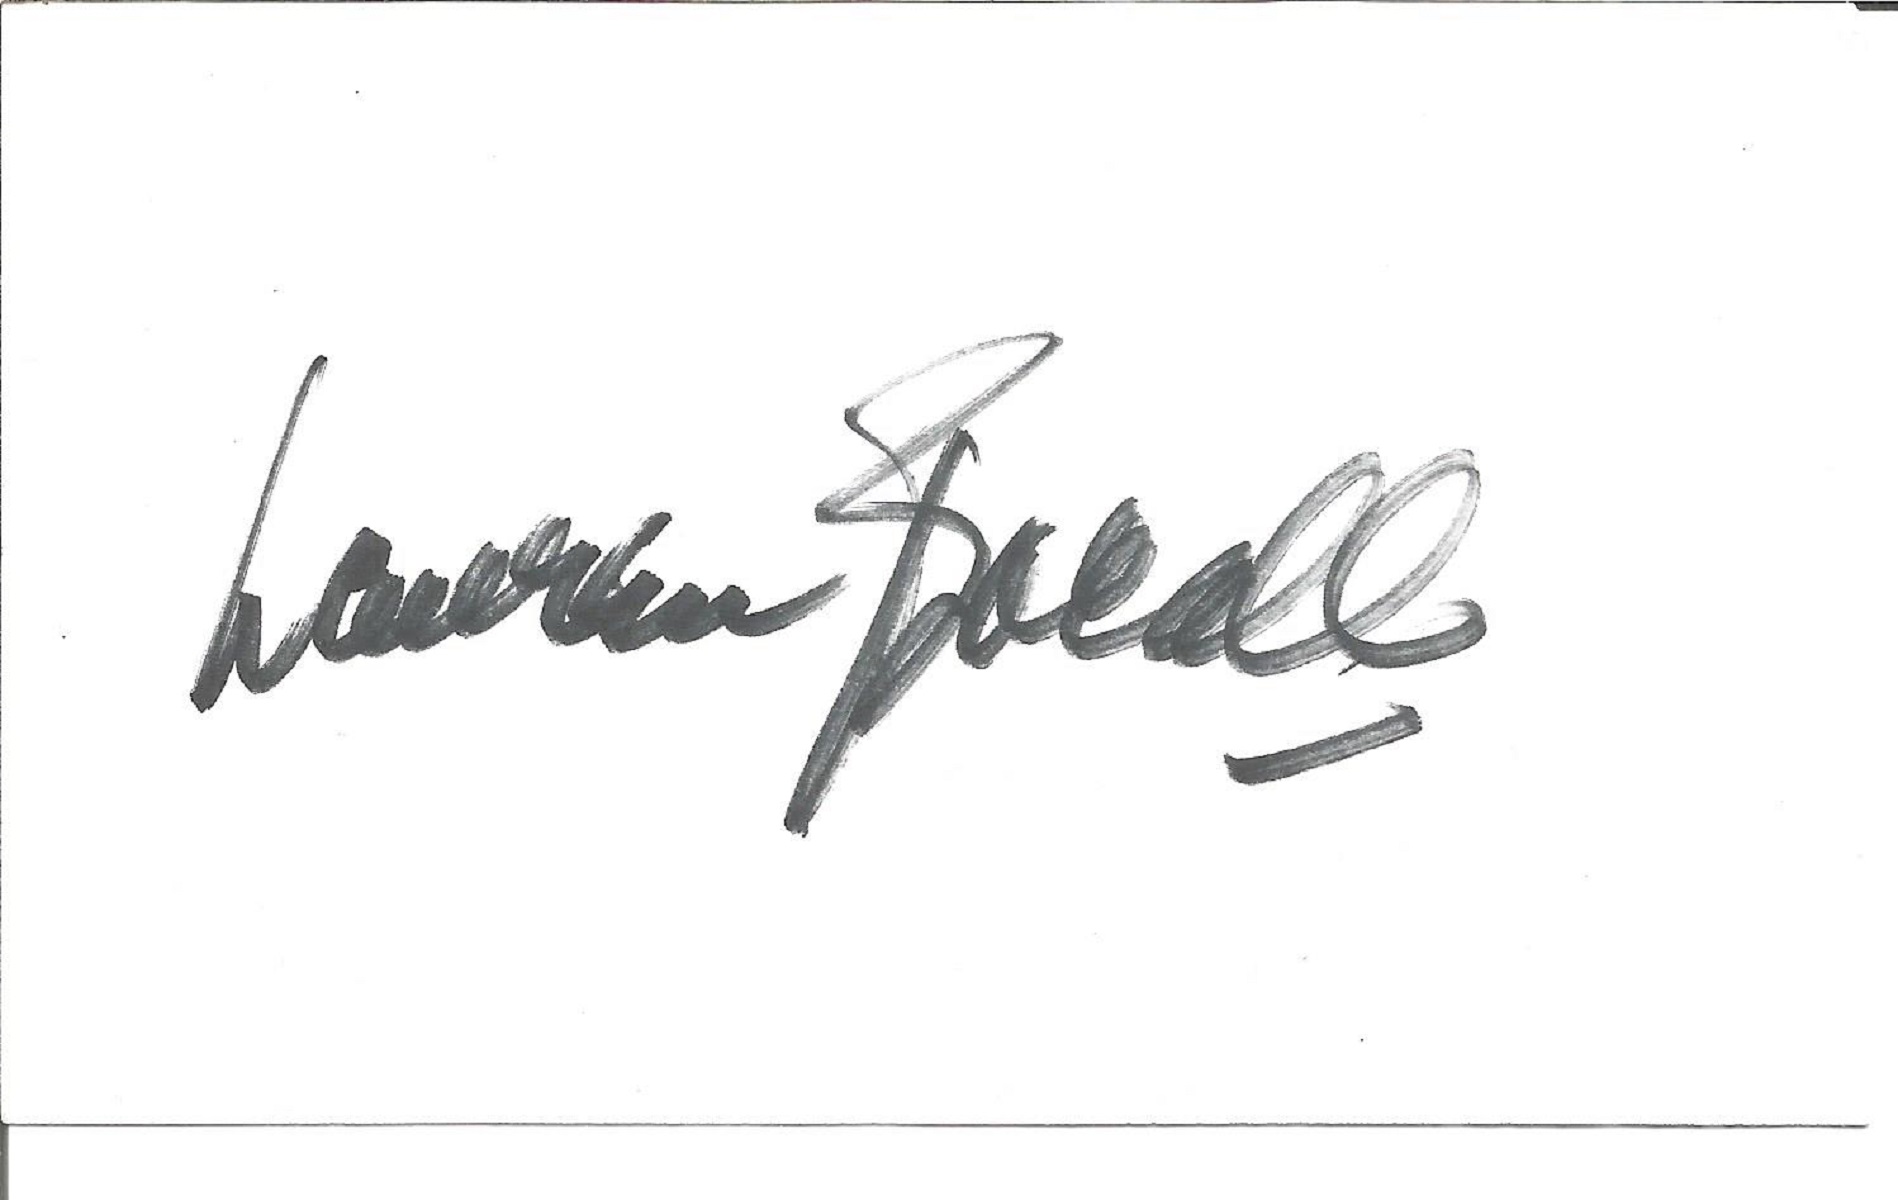 Lauren Bacall signed white card. Bacall was an American actress who was named the 20th-greatest